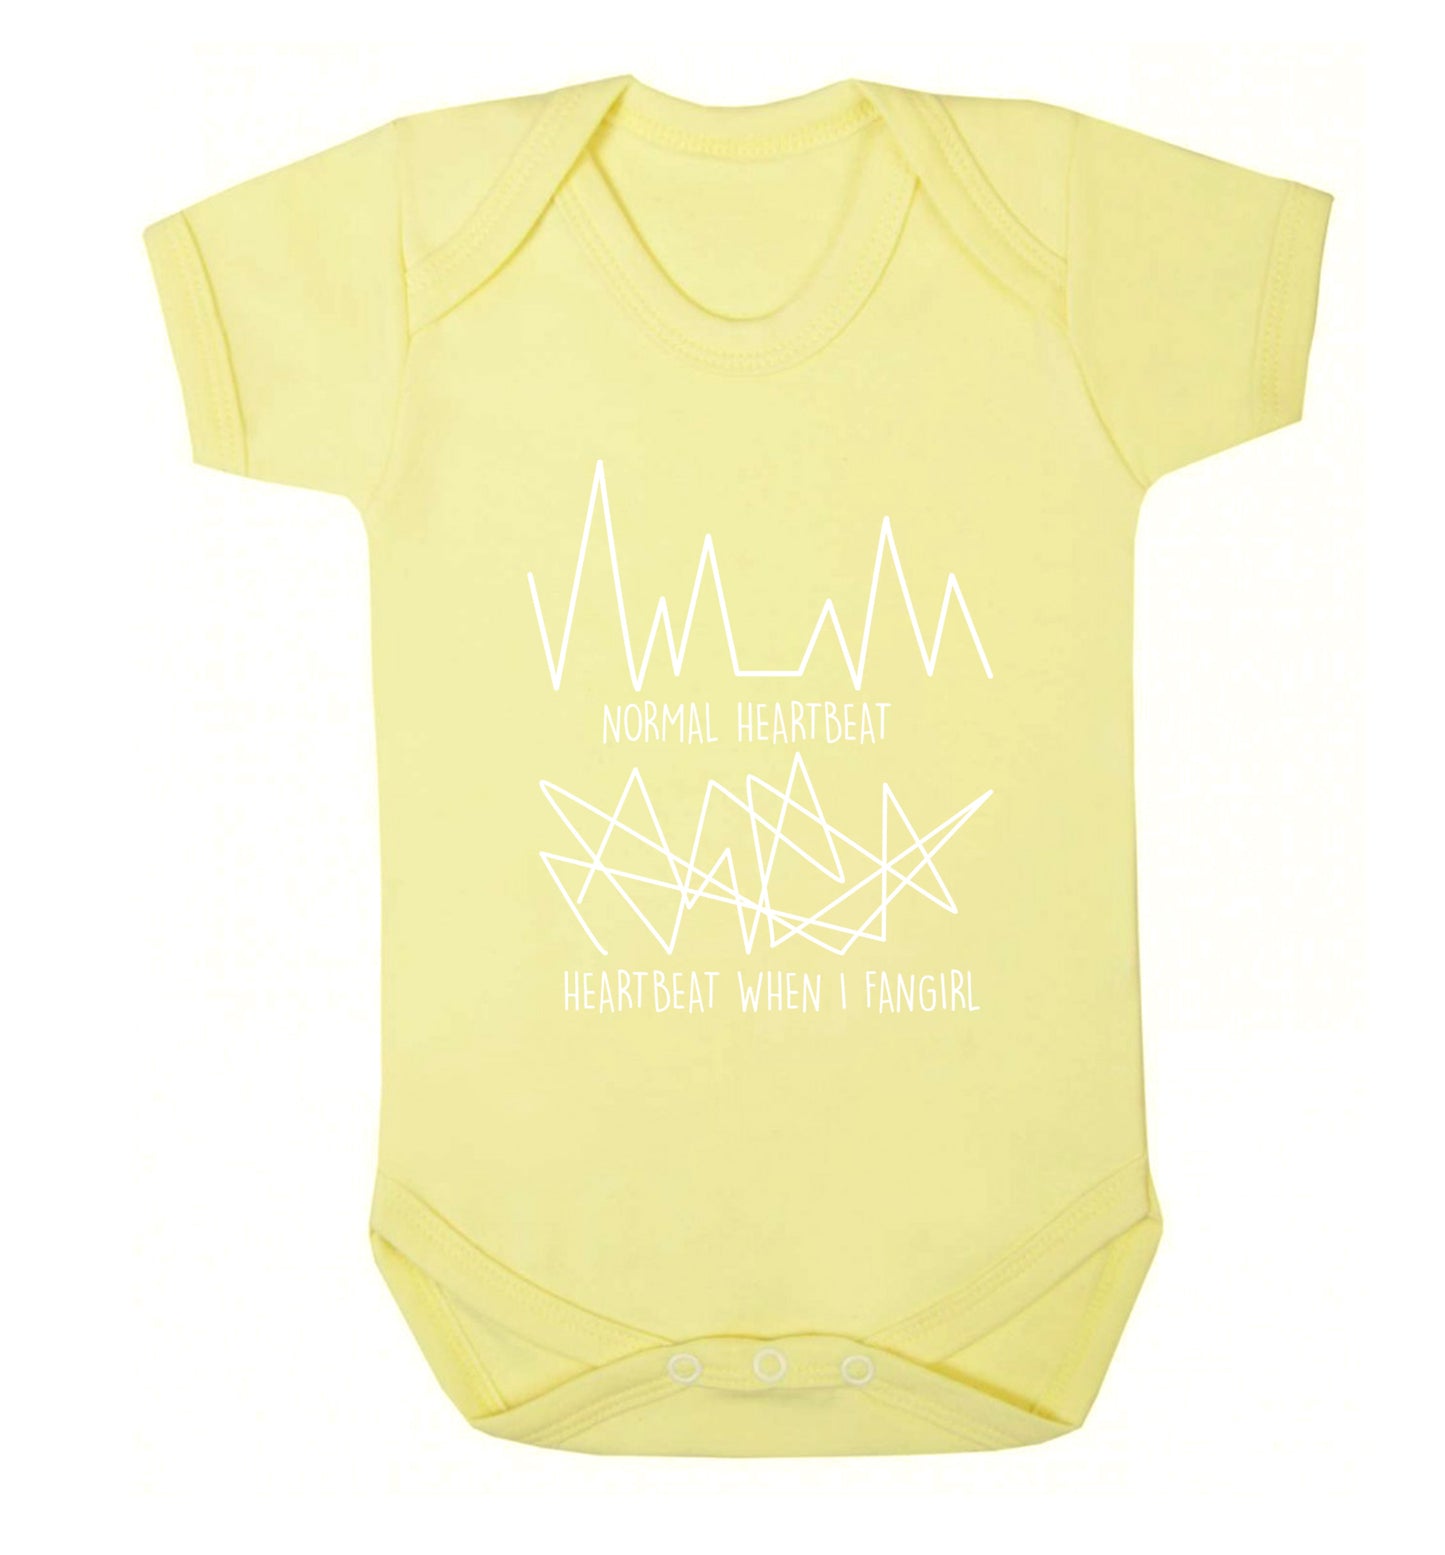 Normal heartbeat heartbeat when I fangirl Baby Vest pale yellow 18-24 months